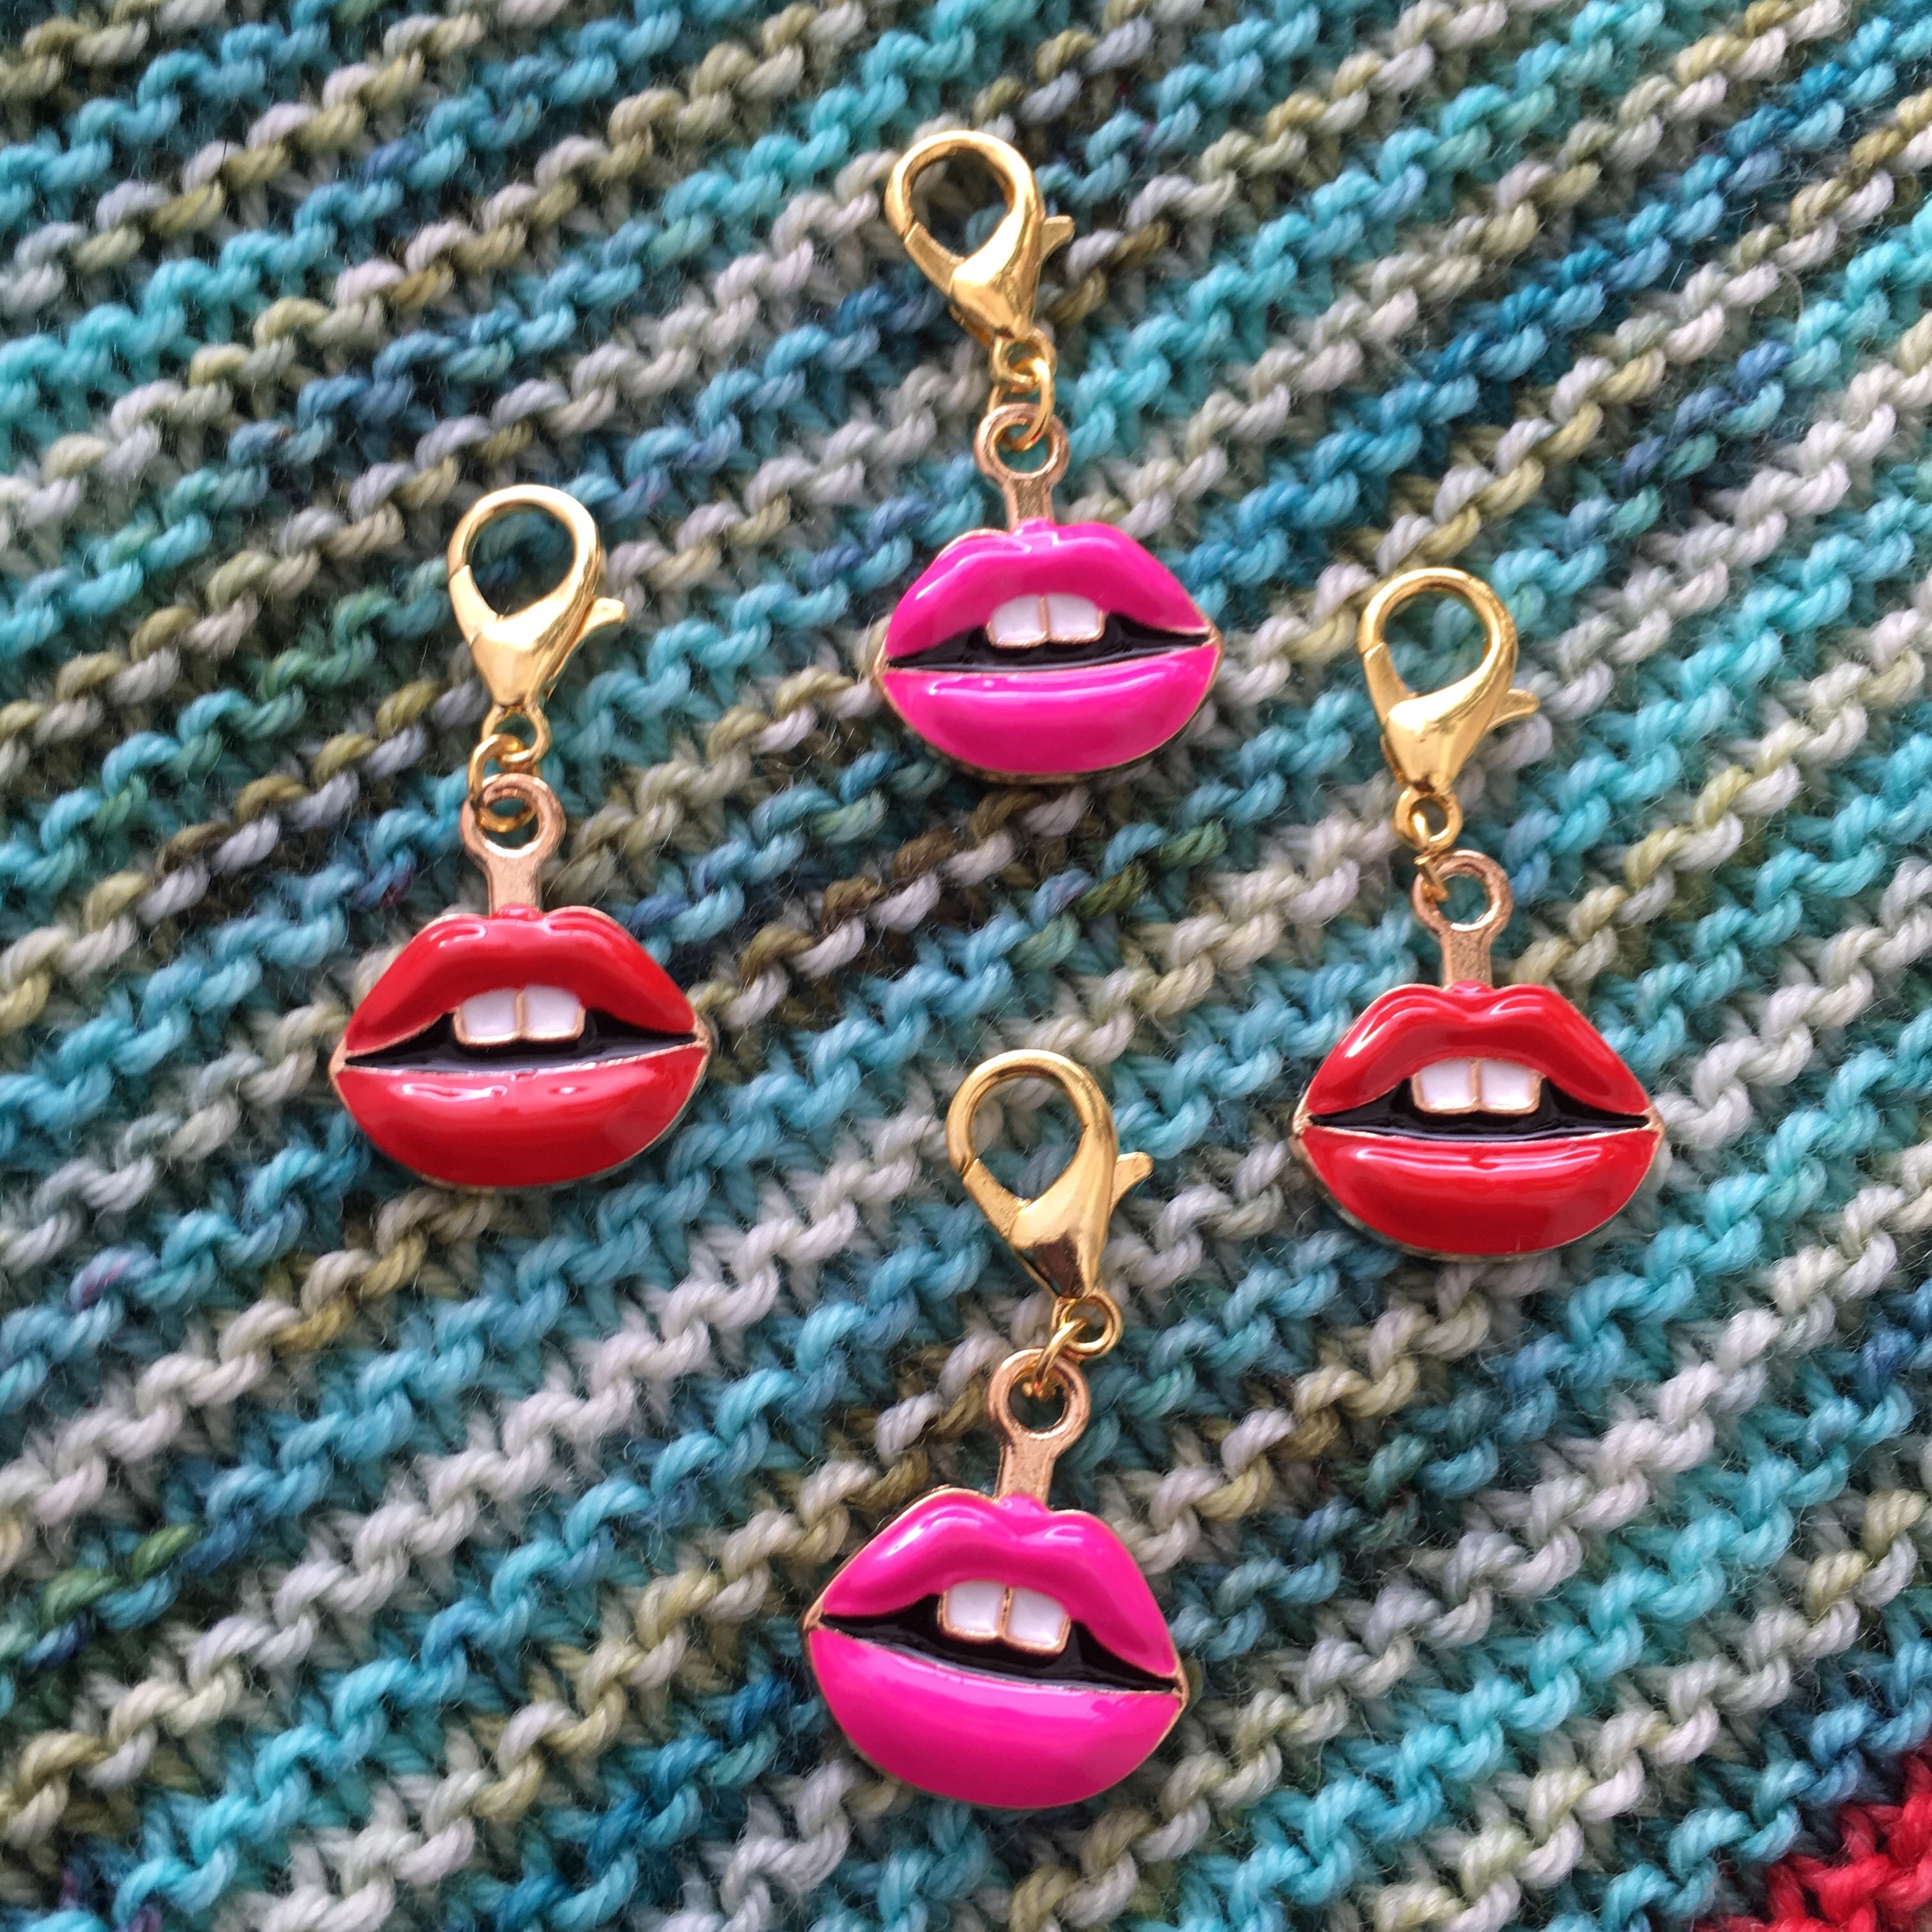 red and pink enamel lips charm on a hanging lbster clasp for knitting and crochet